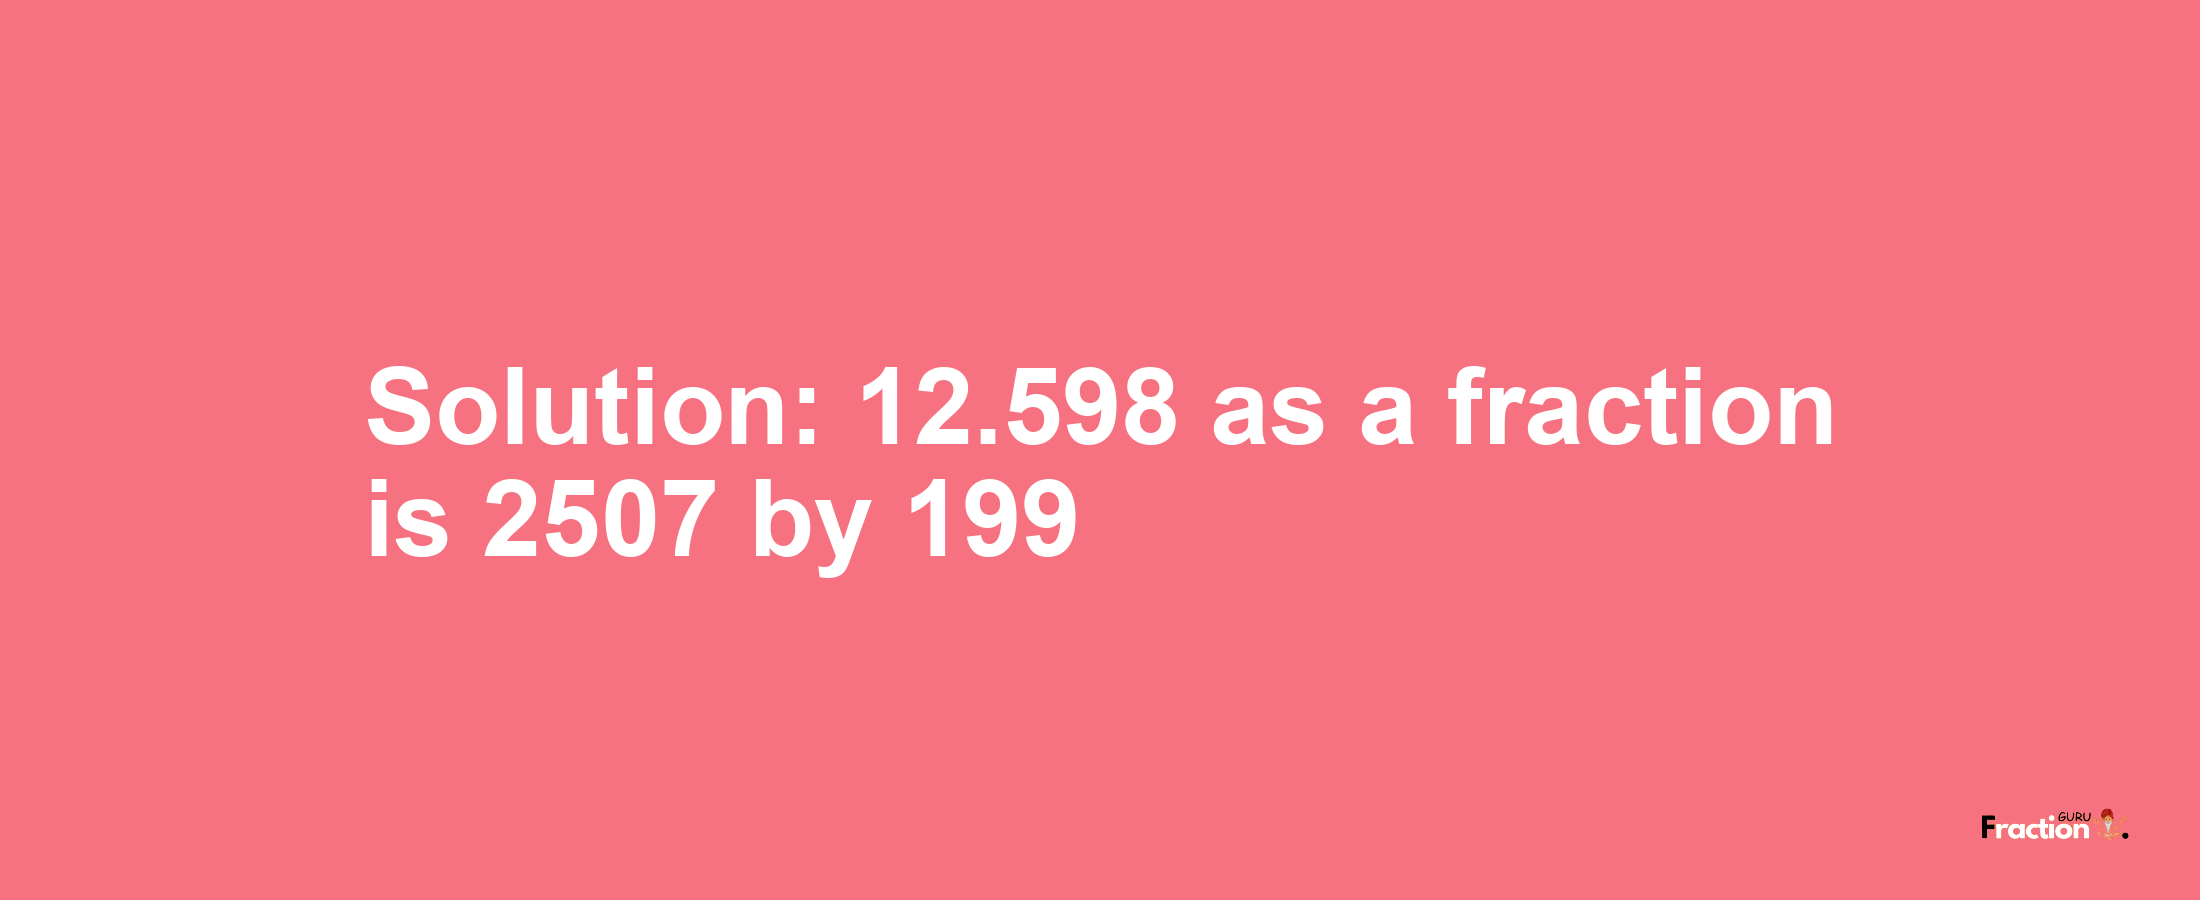 Solution:12.598 as a fraction is 2507/199